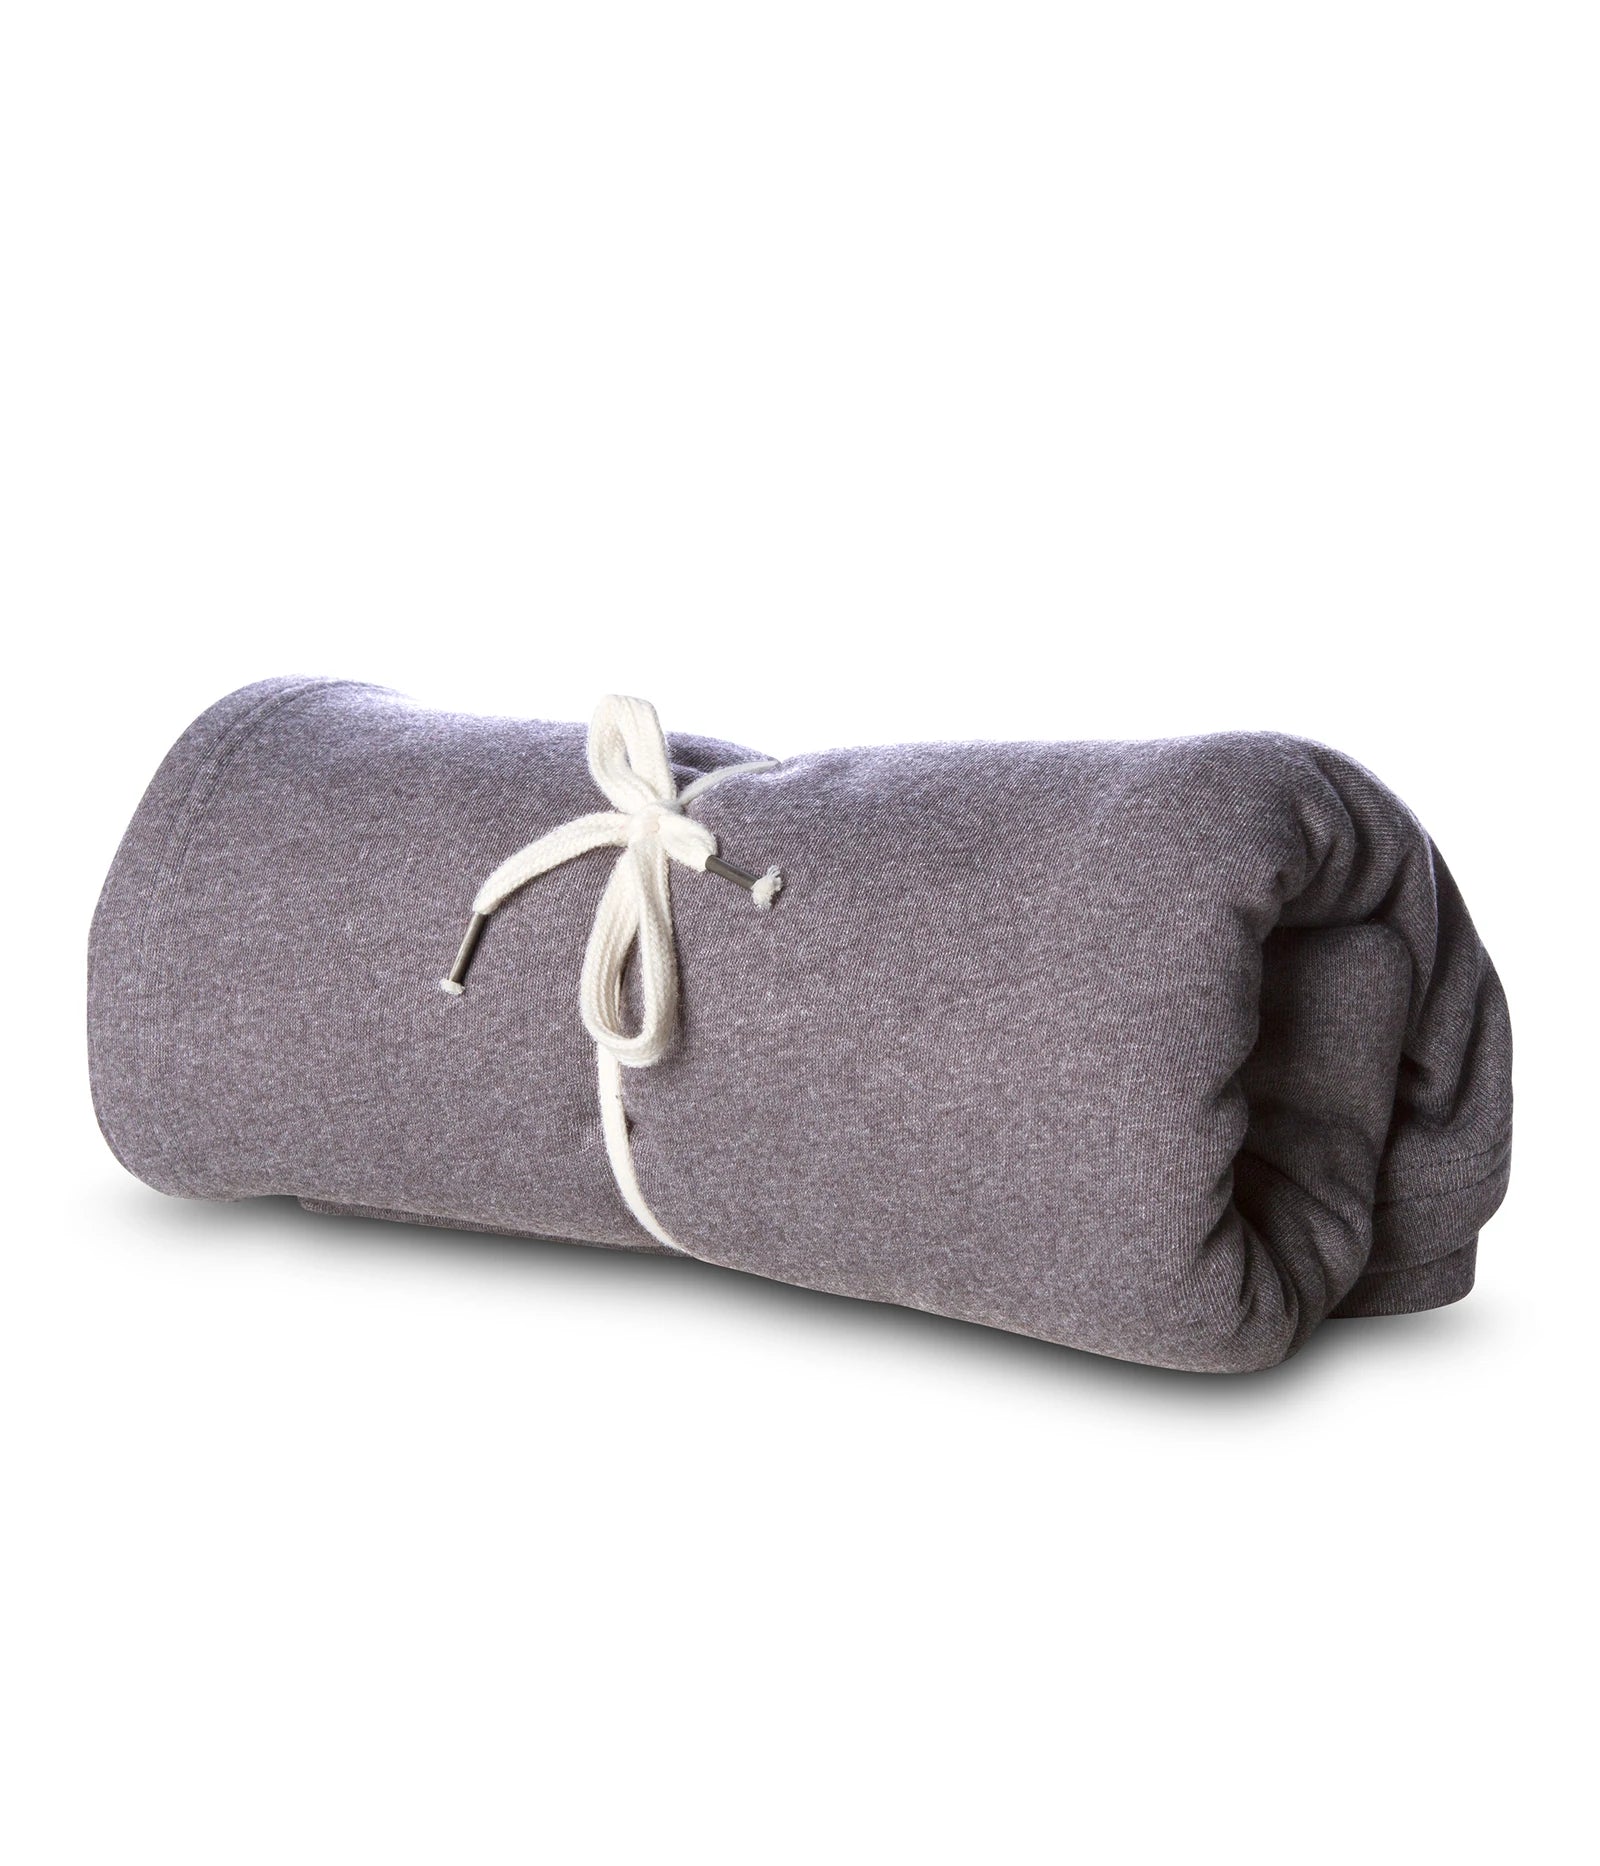 This super cozy blanket offers all the benefits of our cozy sweatshirts and hoodies. Whether you are watching your favorite show on the couch, tailgating at the game, or watching the sunset on the beach, this ultra soft blanket provides the ultimate way to stay warm and cozy. 